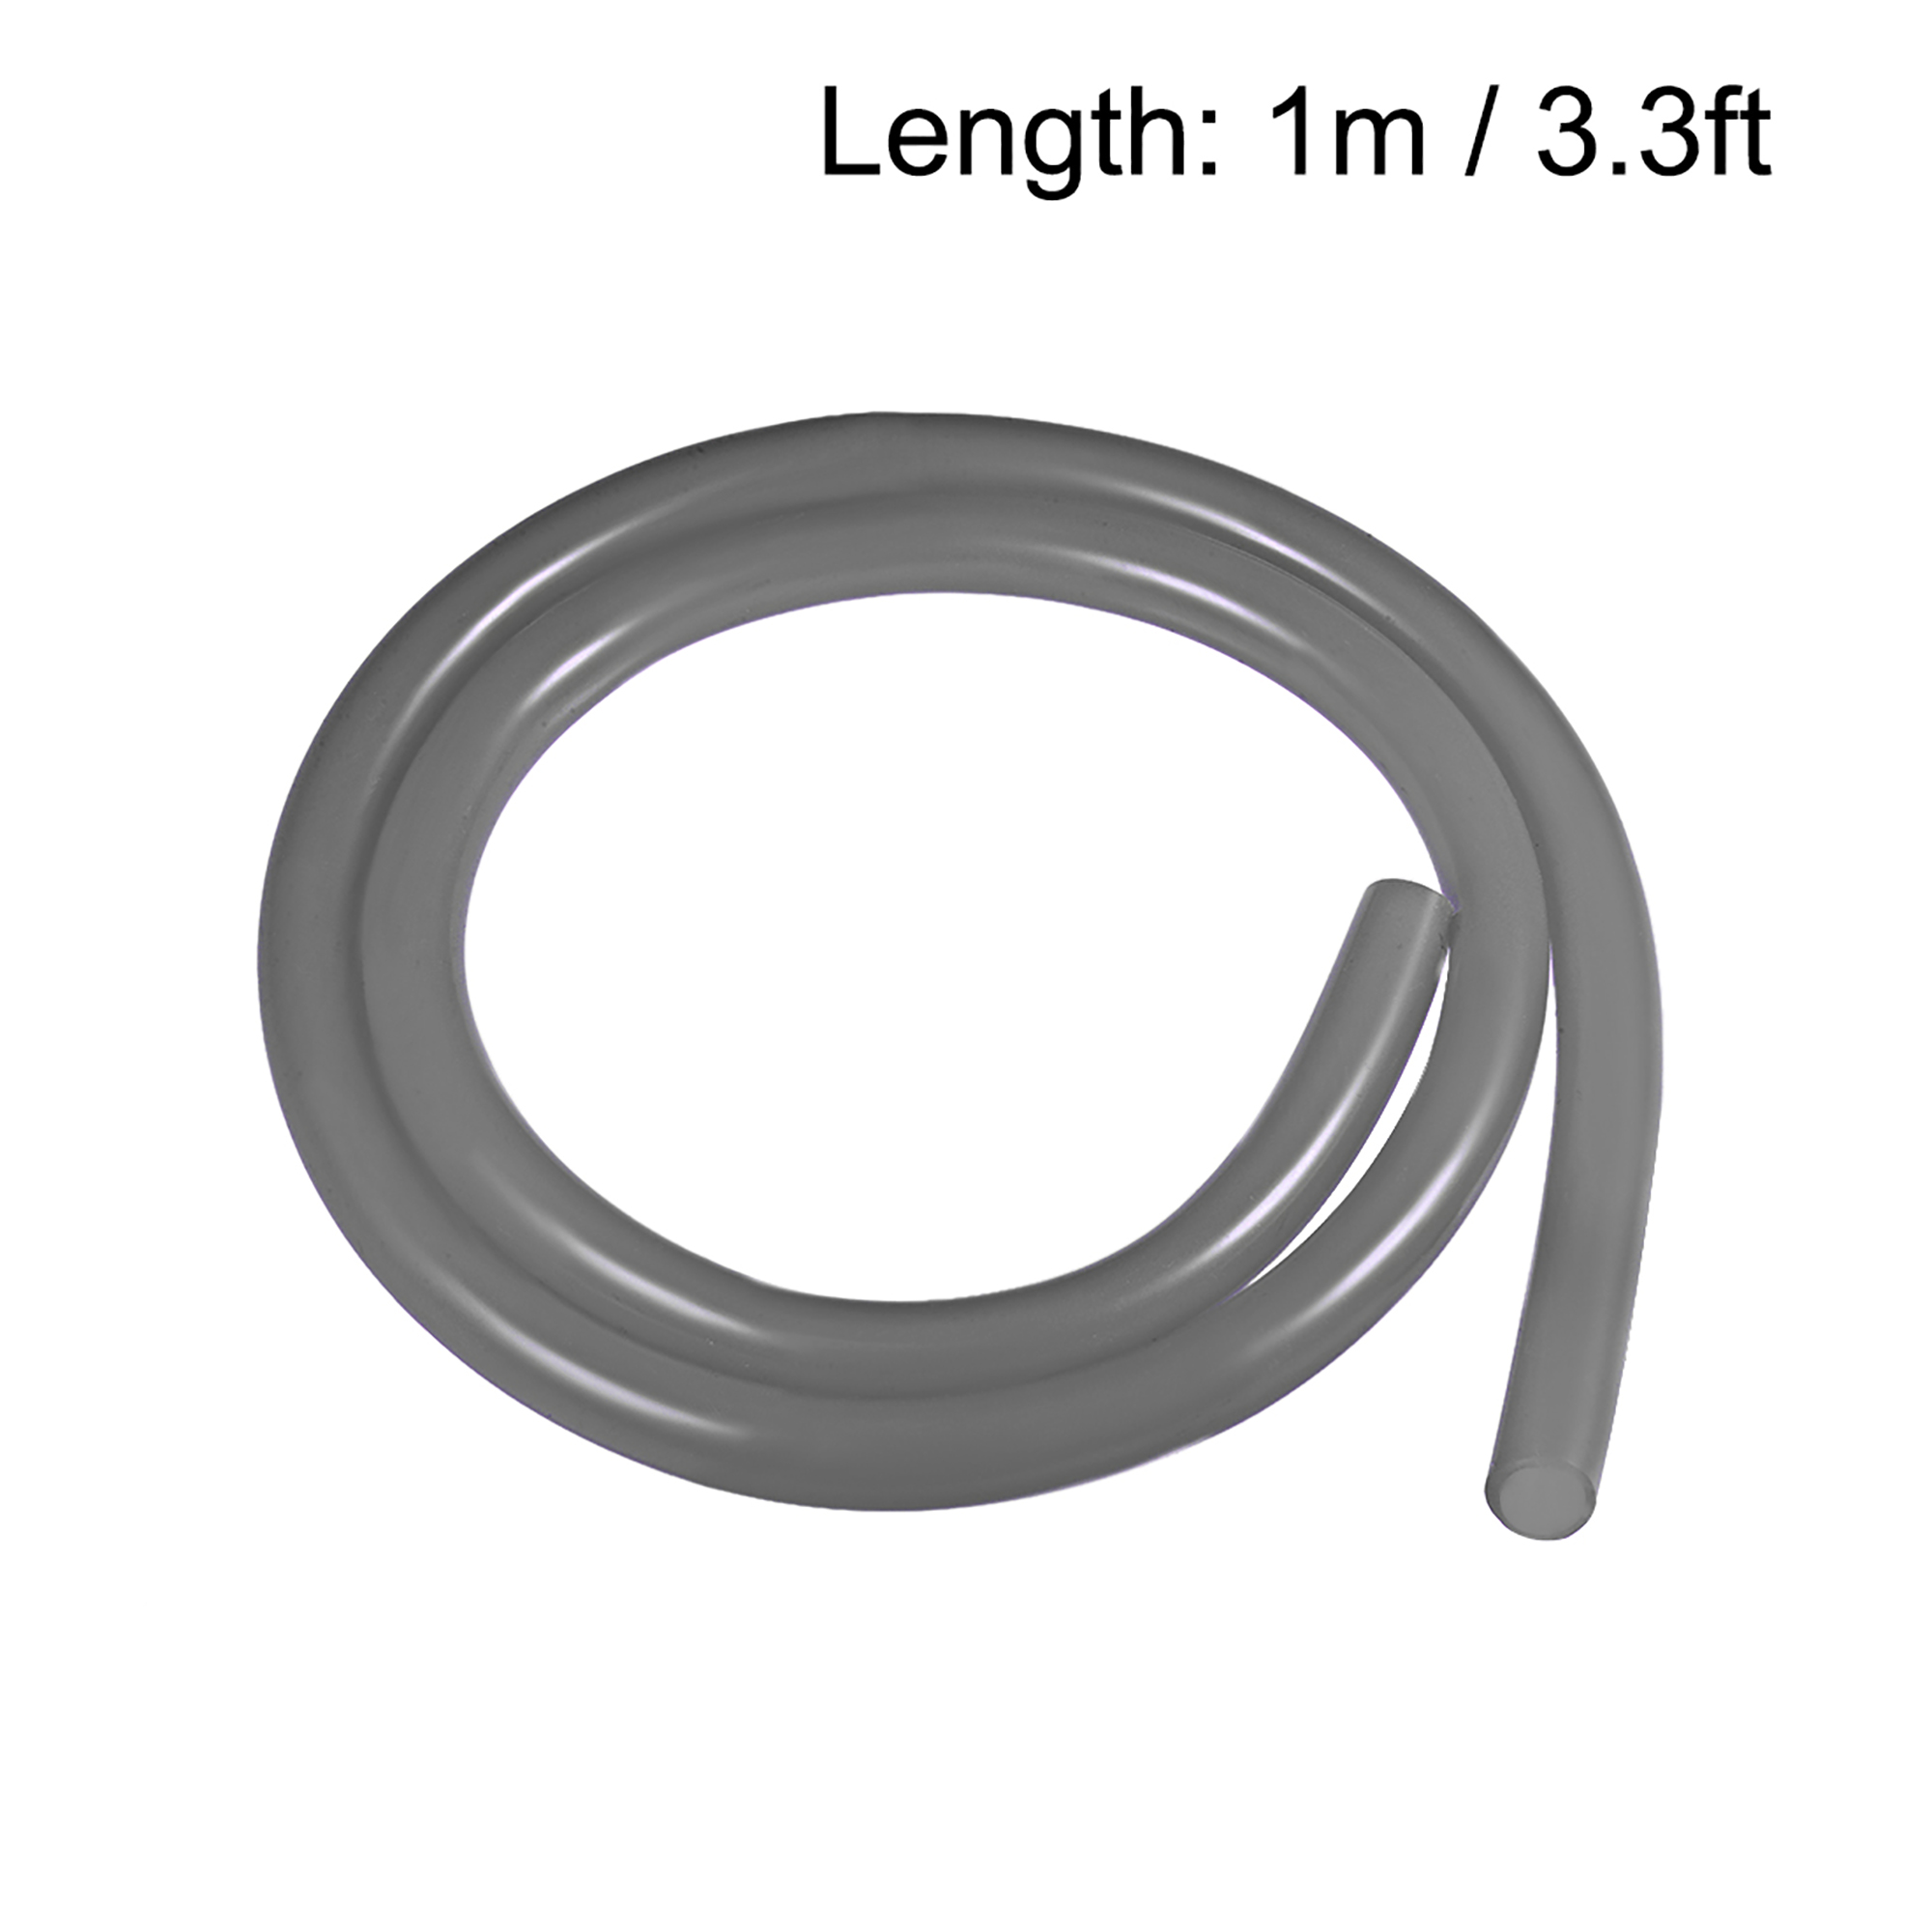 Silicone Tubing, 3/8 inch ID x 9/16 inch OD 3.3ft Rubber Tube High Temp for Pump Transfer Grey - image 3 of 3